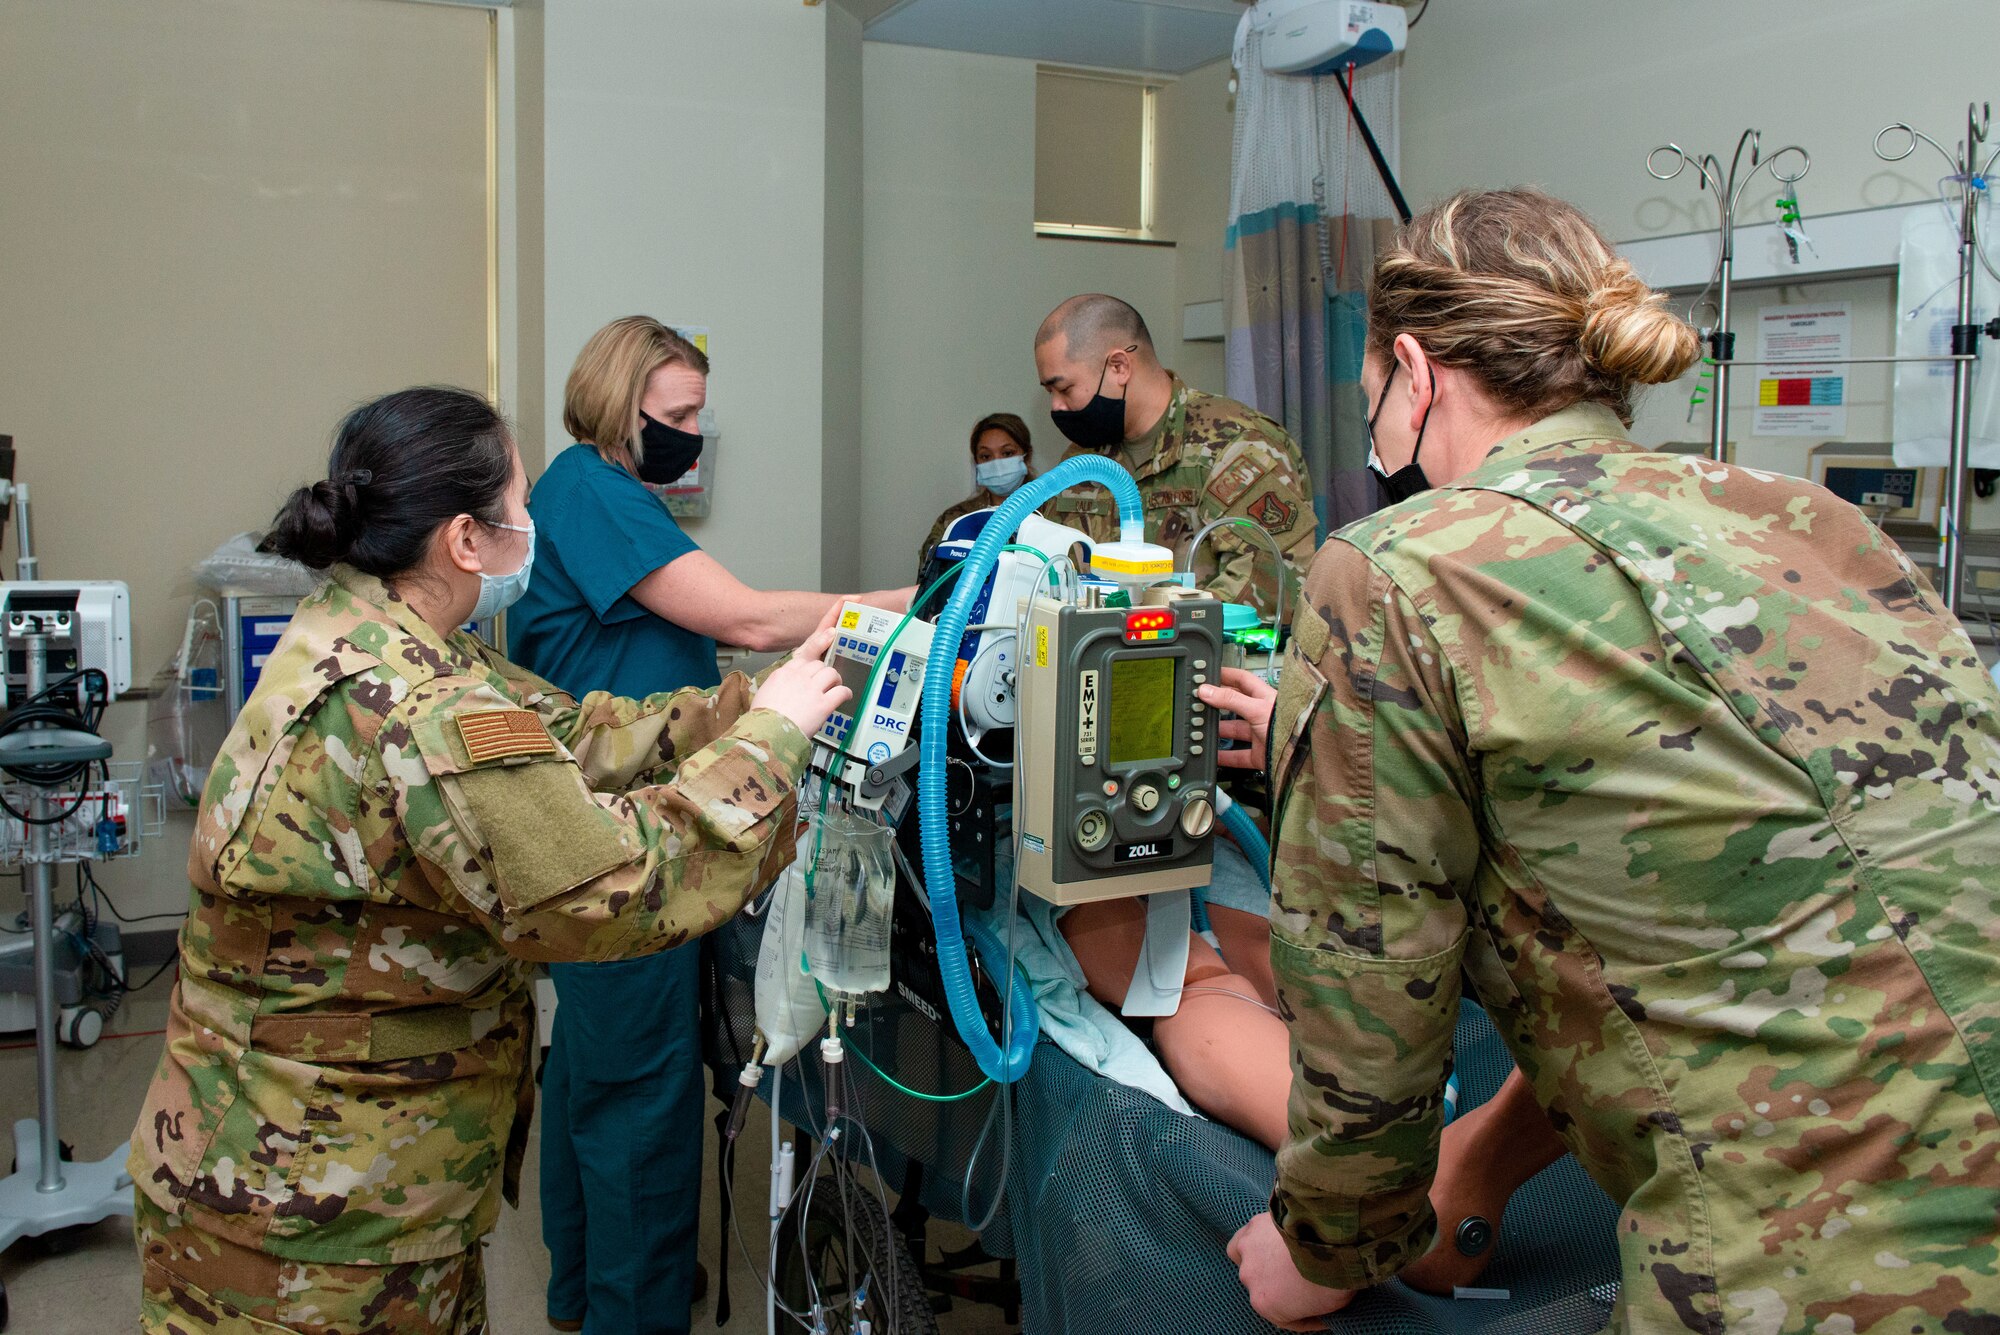 U.S. Air Force Col. Kirsten Aguilar, second from left, Joint Base Elmendorf-Richardson and 673d Air Base Wing commander, and the 673d Medical Group’s Critical Care Air Transport Team practice treating a pneumothorax on a dummy in a simulated in-flight environment using a transport ventilator during a 673d Inpatient Operations Squadron immersion at Joint Base Elmendorf-Richardson, Alaska, Feb. 26, 2021. The tour familiarized base leadership with the 673d IPTS and its role in supporting readiness. The 673d IPTS provides a full range of medical care to include perinatal care, intensive care, and behavioral health services to JBER and the greater Anchorage area.